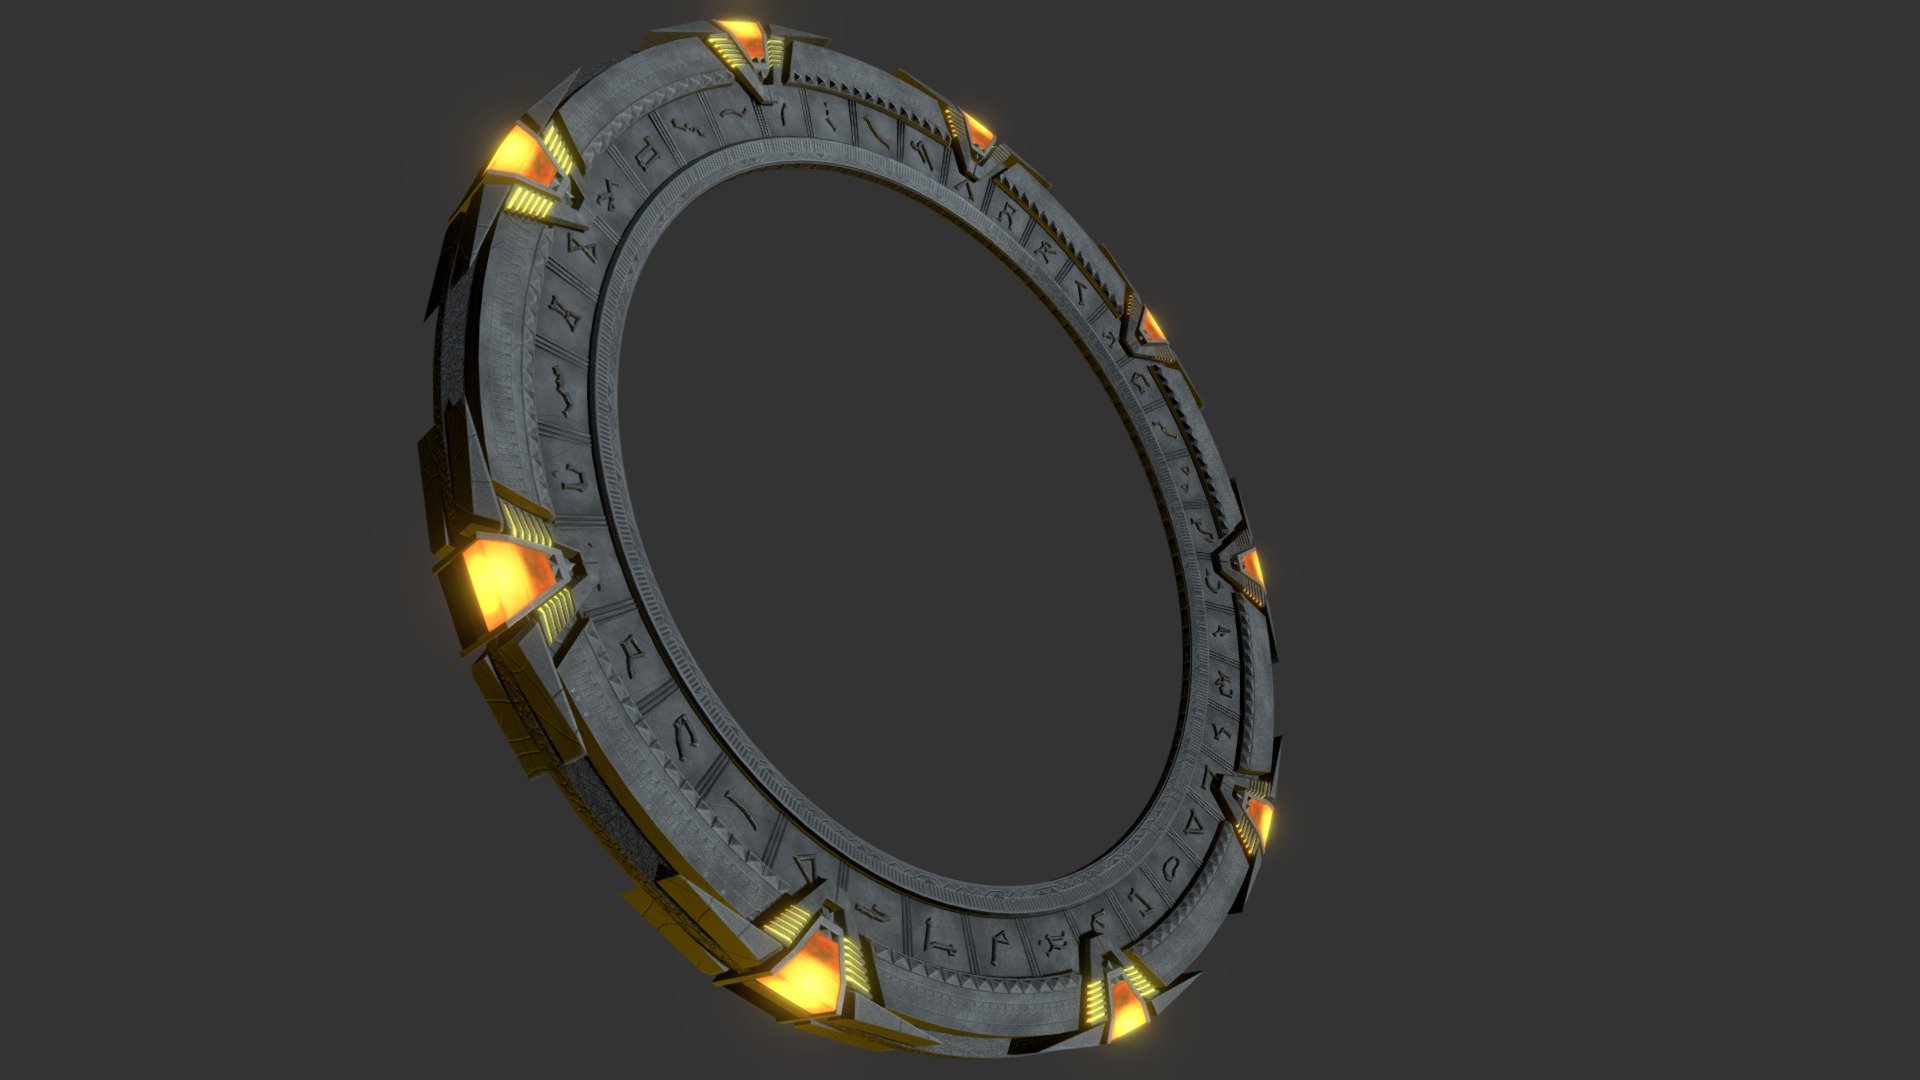 A semi-accurate Stargate model I did on my spare time.

The backside chevrons have flipped faces for whatever reason, probably messed them up while exporting the fbx 3d model